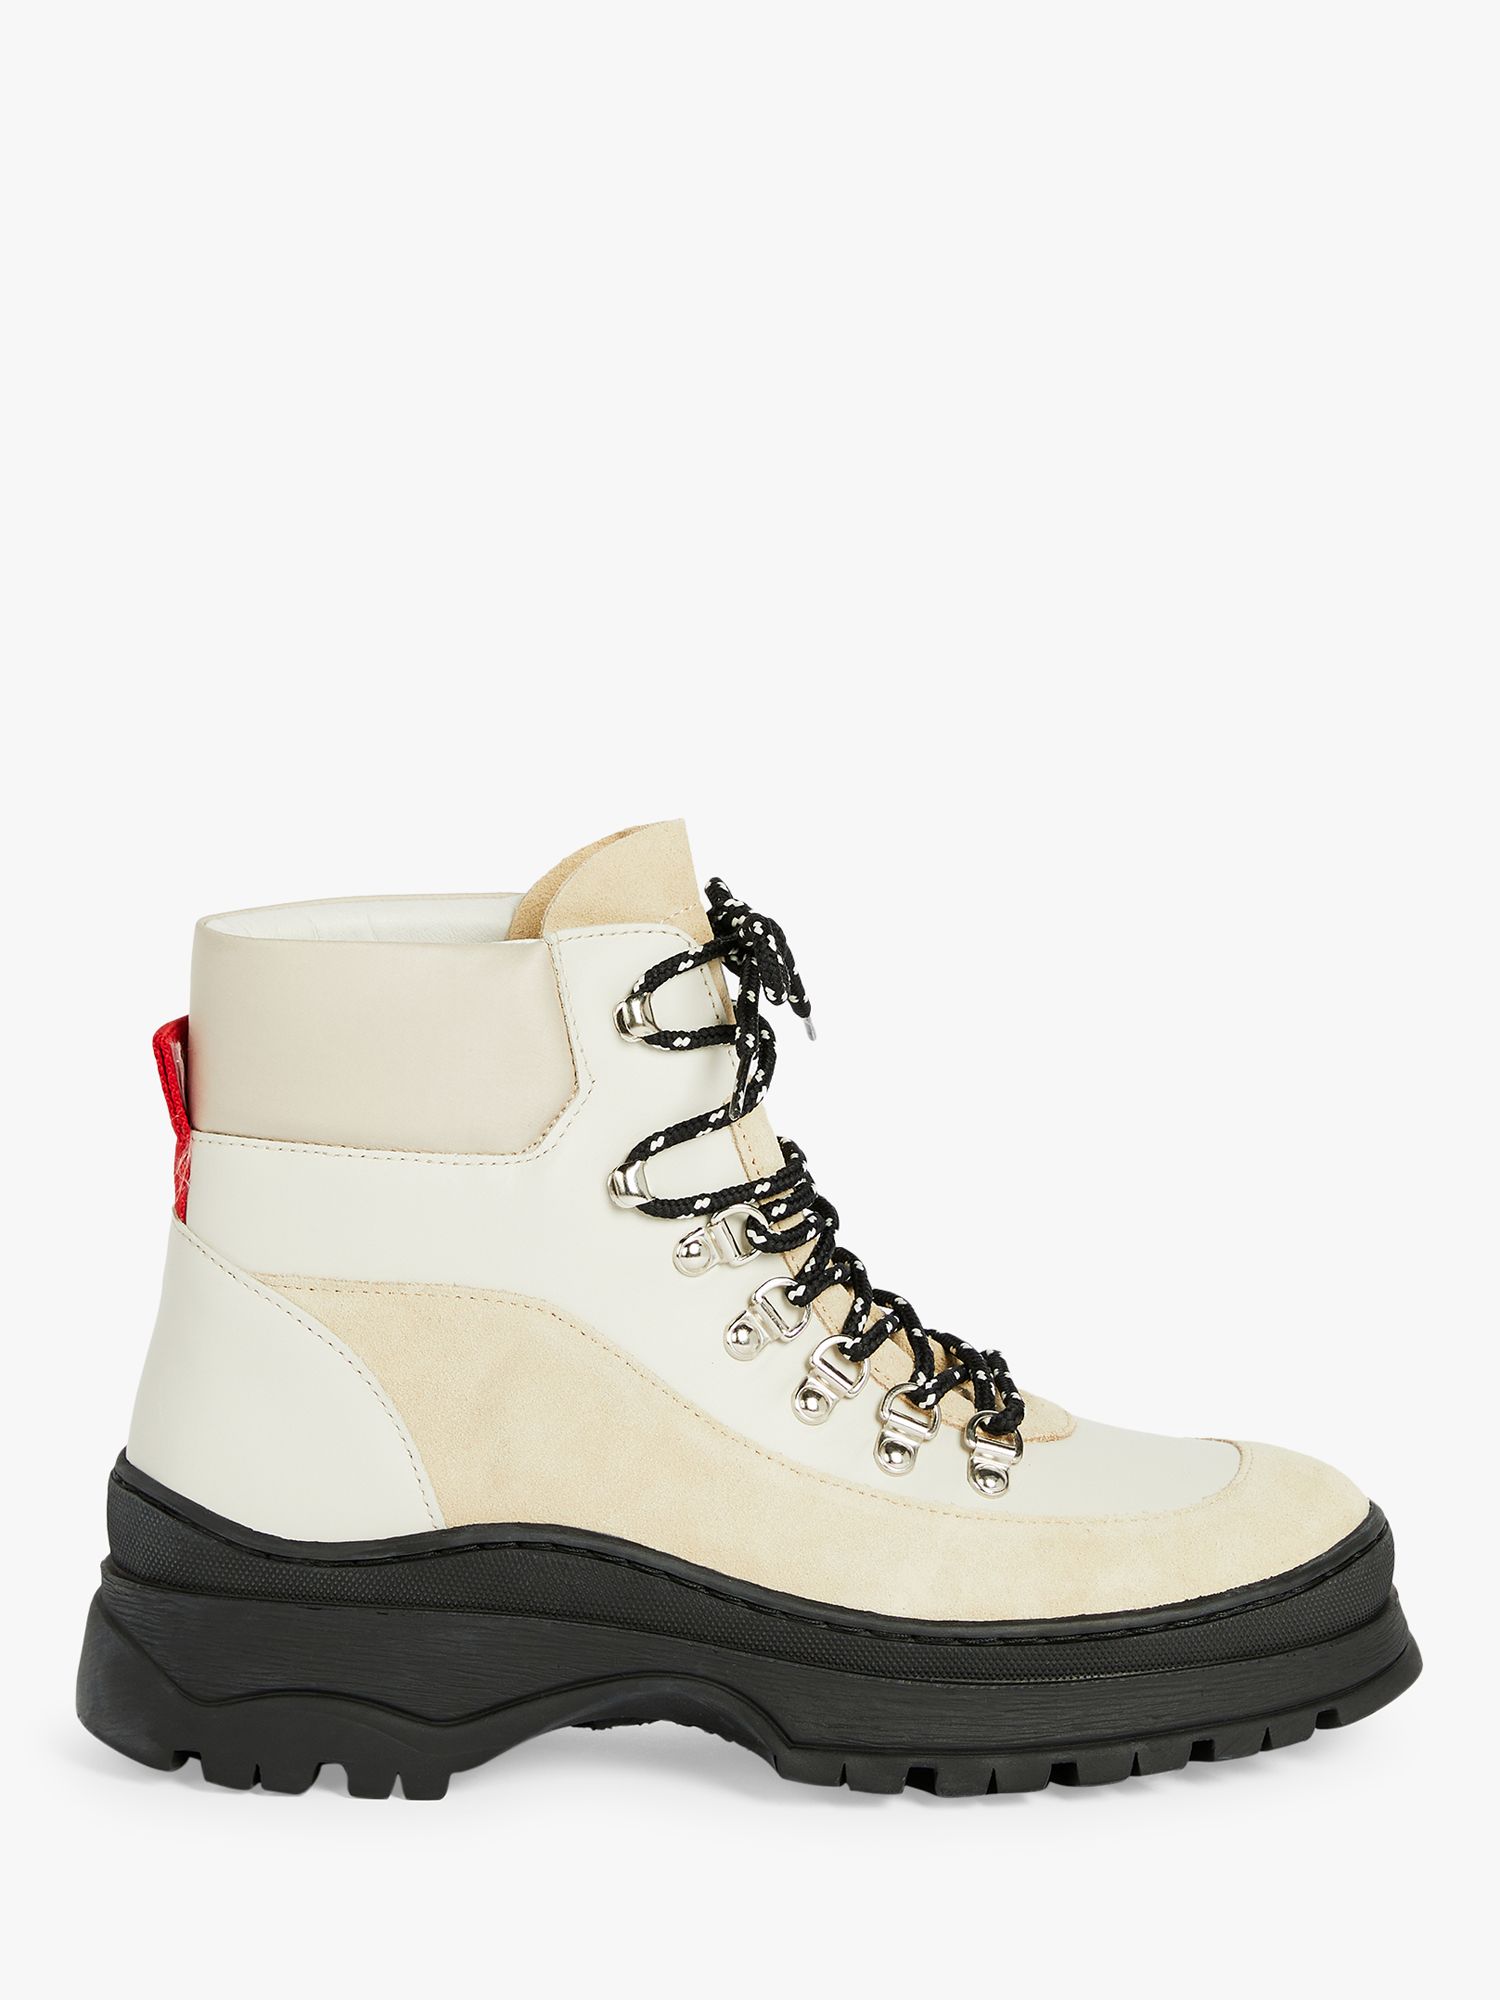 Ted Baker Allicia Leather Suede Hiker Boots